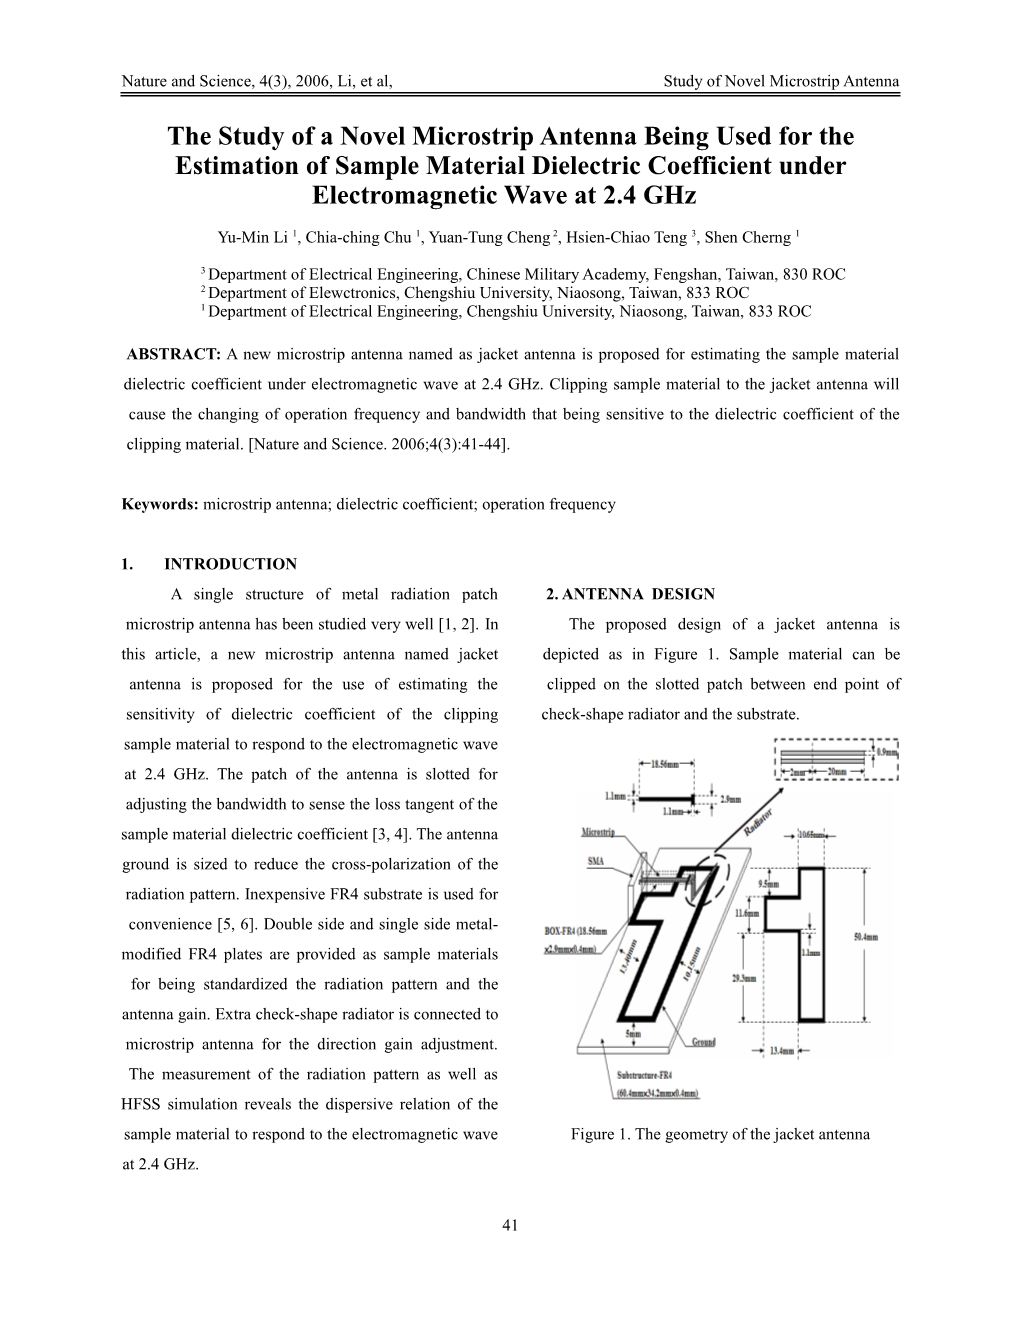 Study of Novel Microstrip Antenna Used for Estimating Sample Material